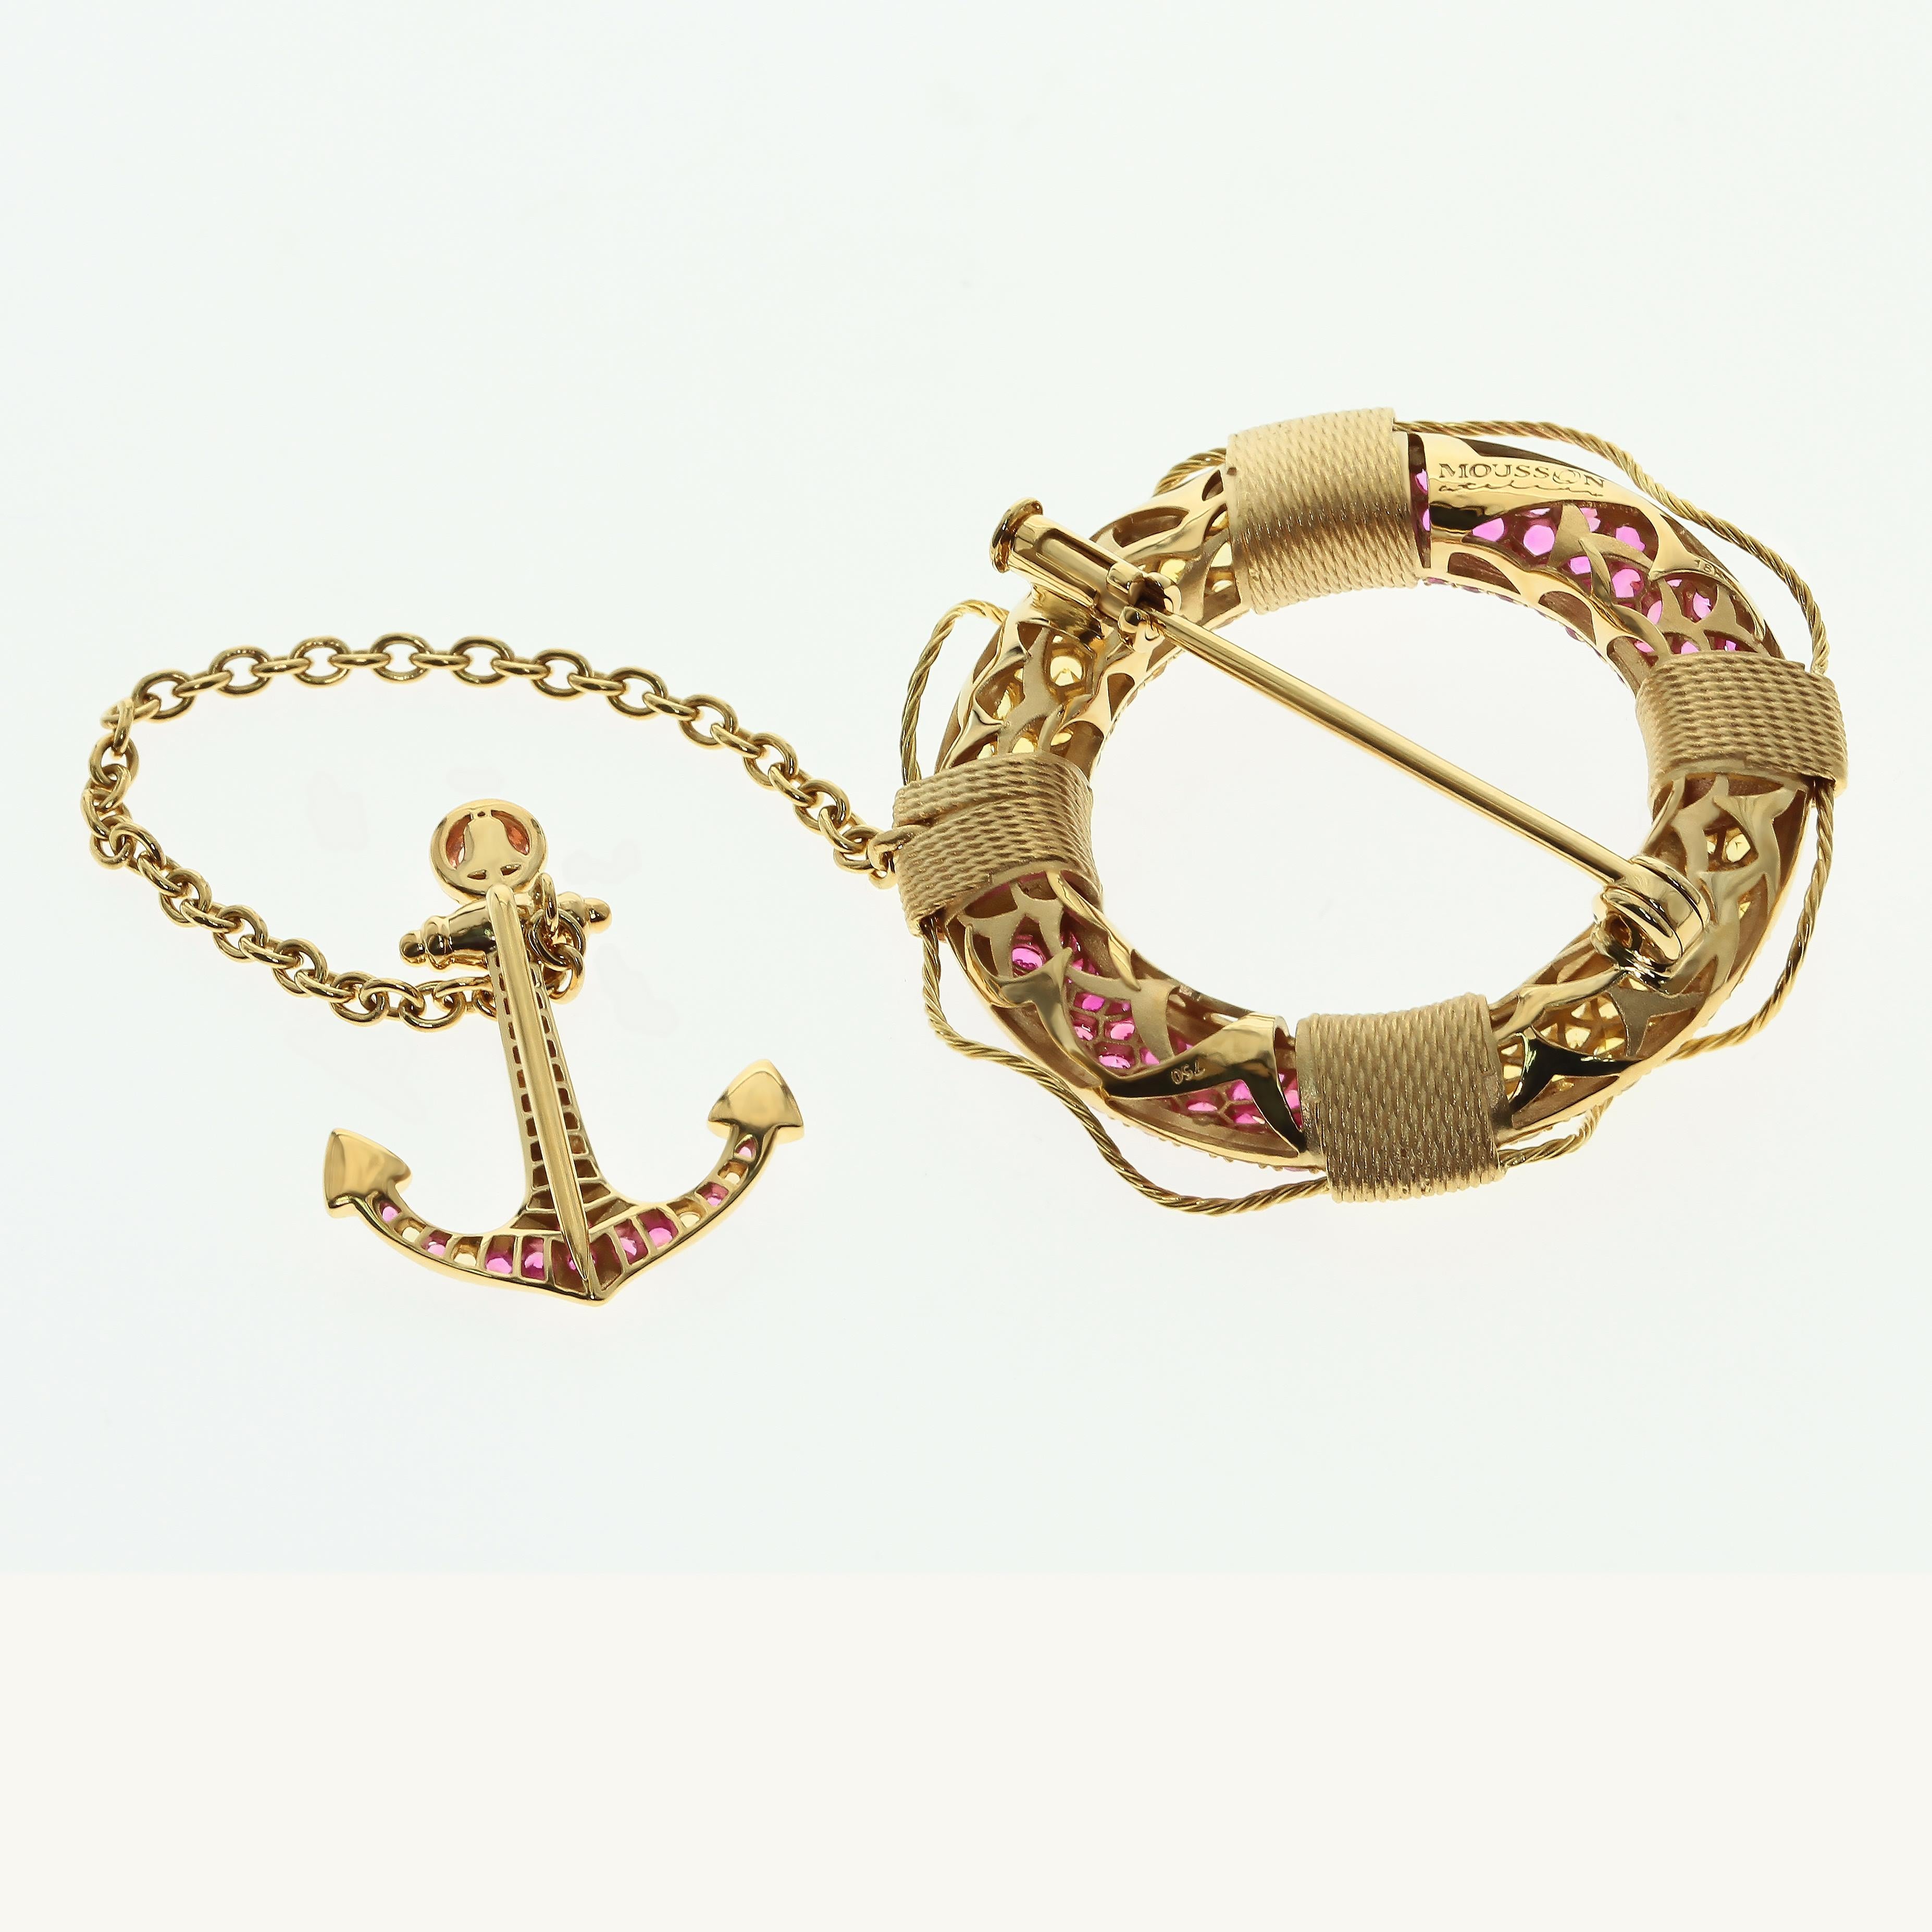 Yellow and Pink Sapphire 18 Karat Yellow Gold Lifebuoy and Anchor Brooch.
From our Marina Collection. As a present, speaks himself: Lifebuoy - save in love with you, Anchor - and stay with you forever.

Accompanied with the ring LU116414772011 and